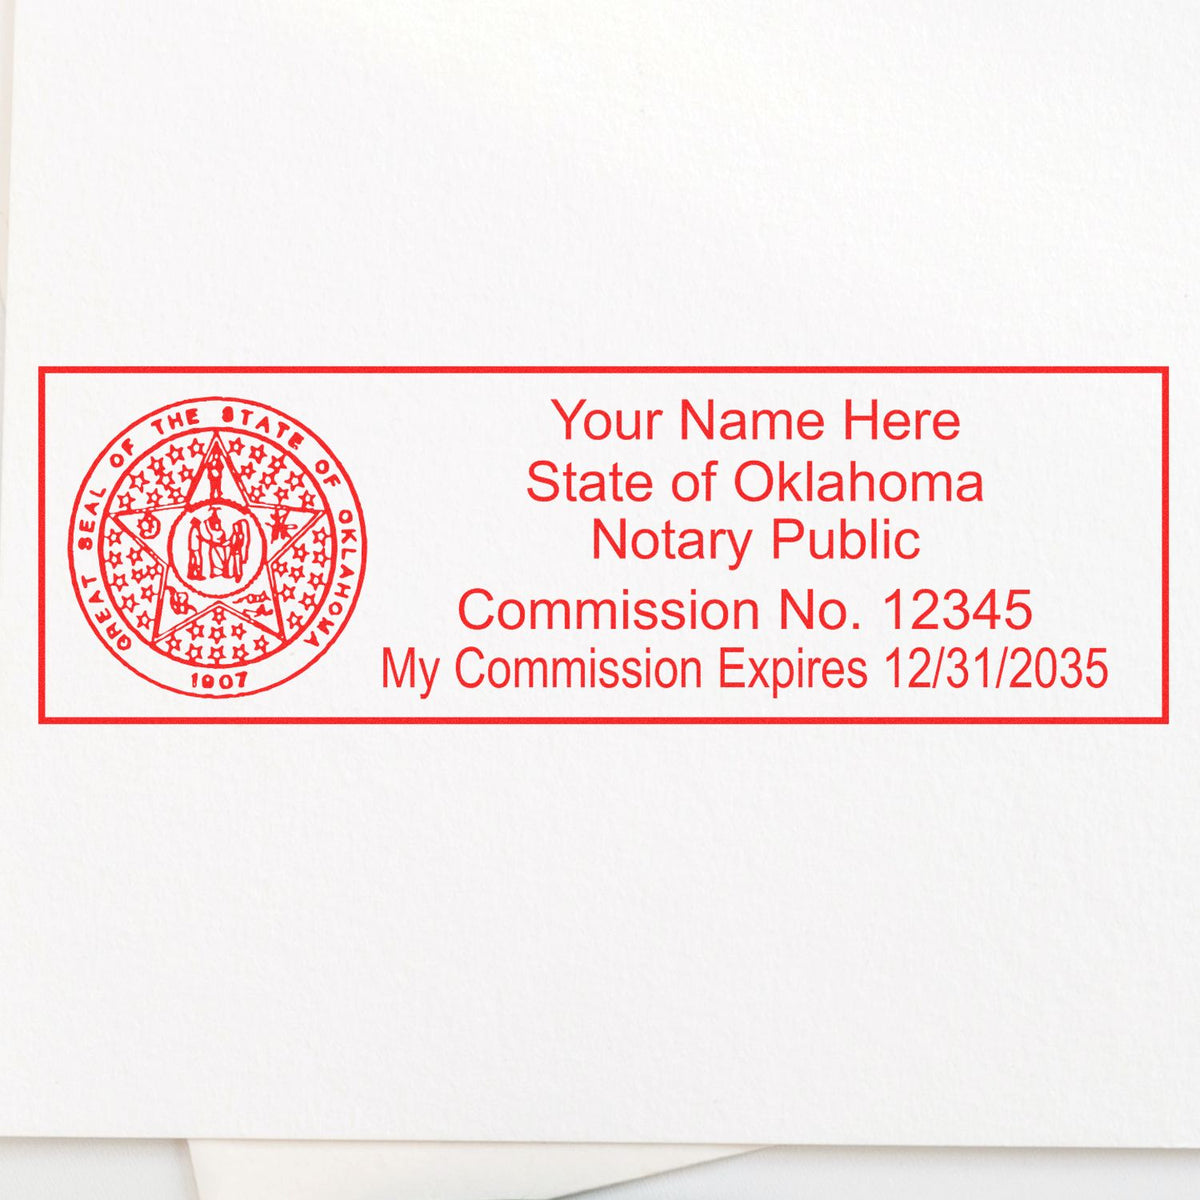 The Heavy-Duty Oklahoma Rectangular Notary Stamp stamp impression comes to life with a crisp, detailed photo on paper - showcasing true professional quality.